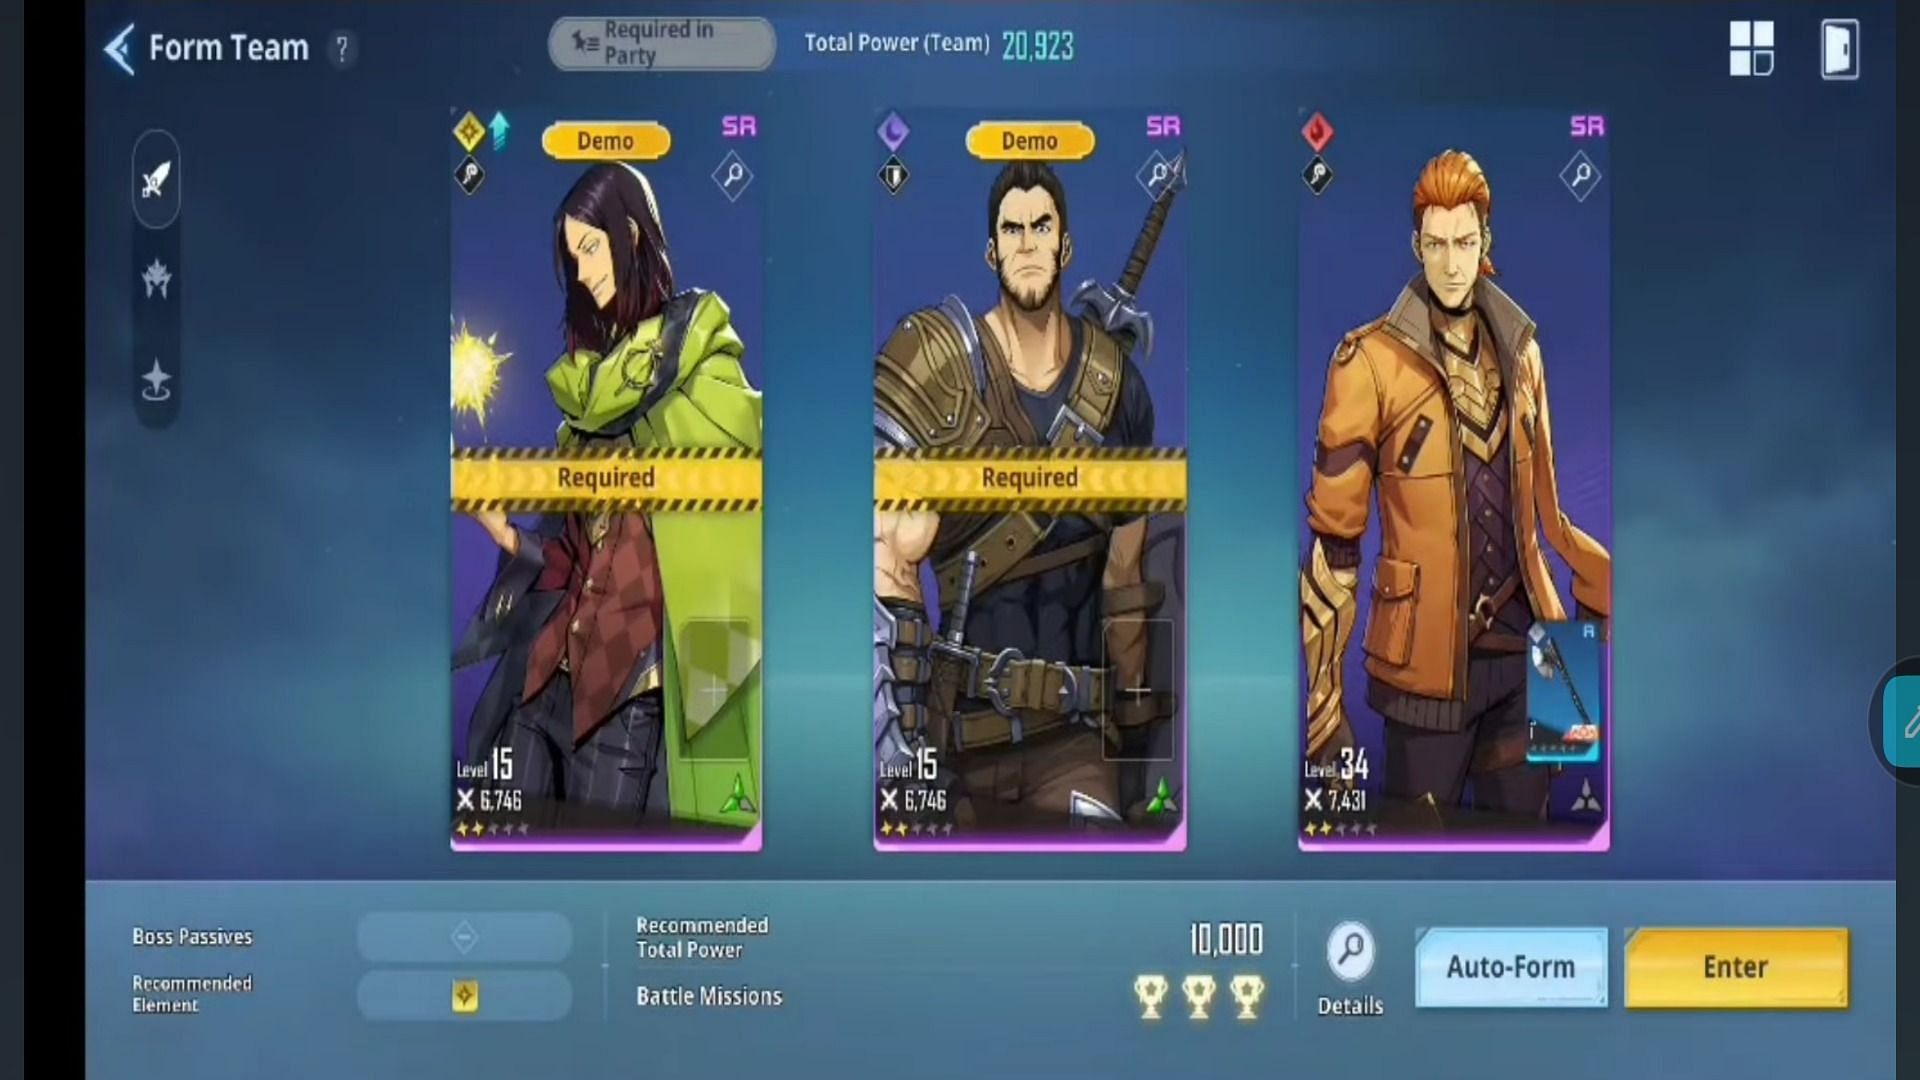 This can be a great team to complete the mission (Image via Netmarble)